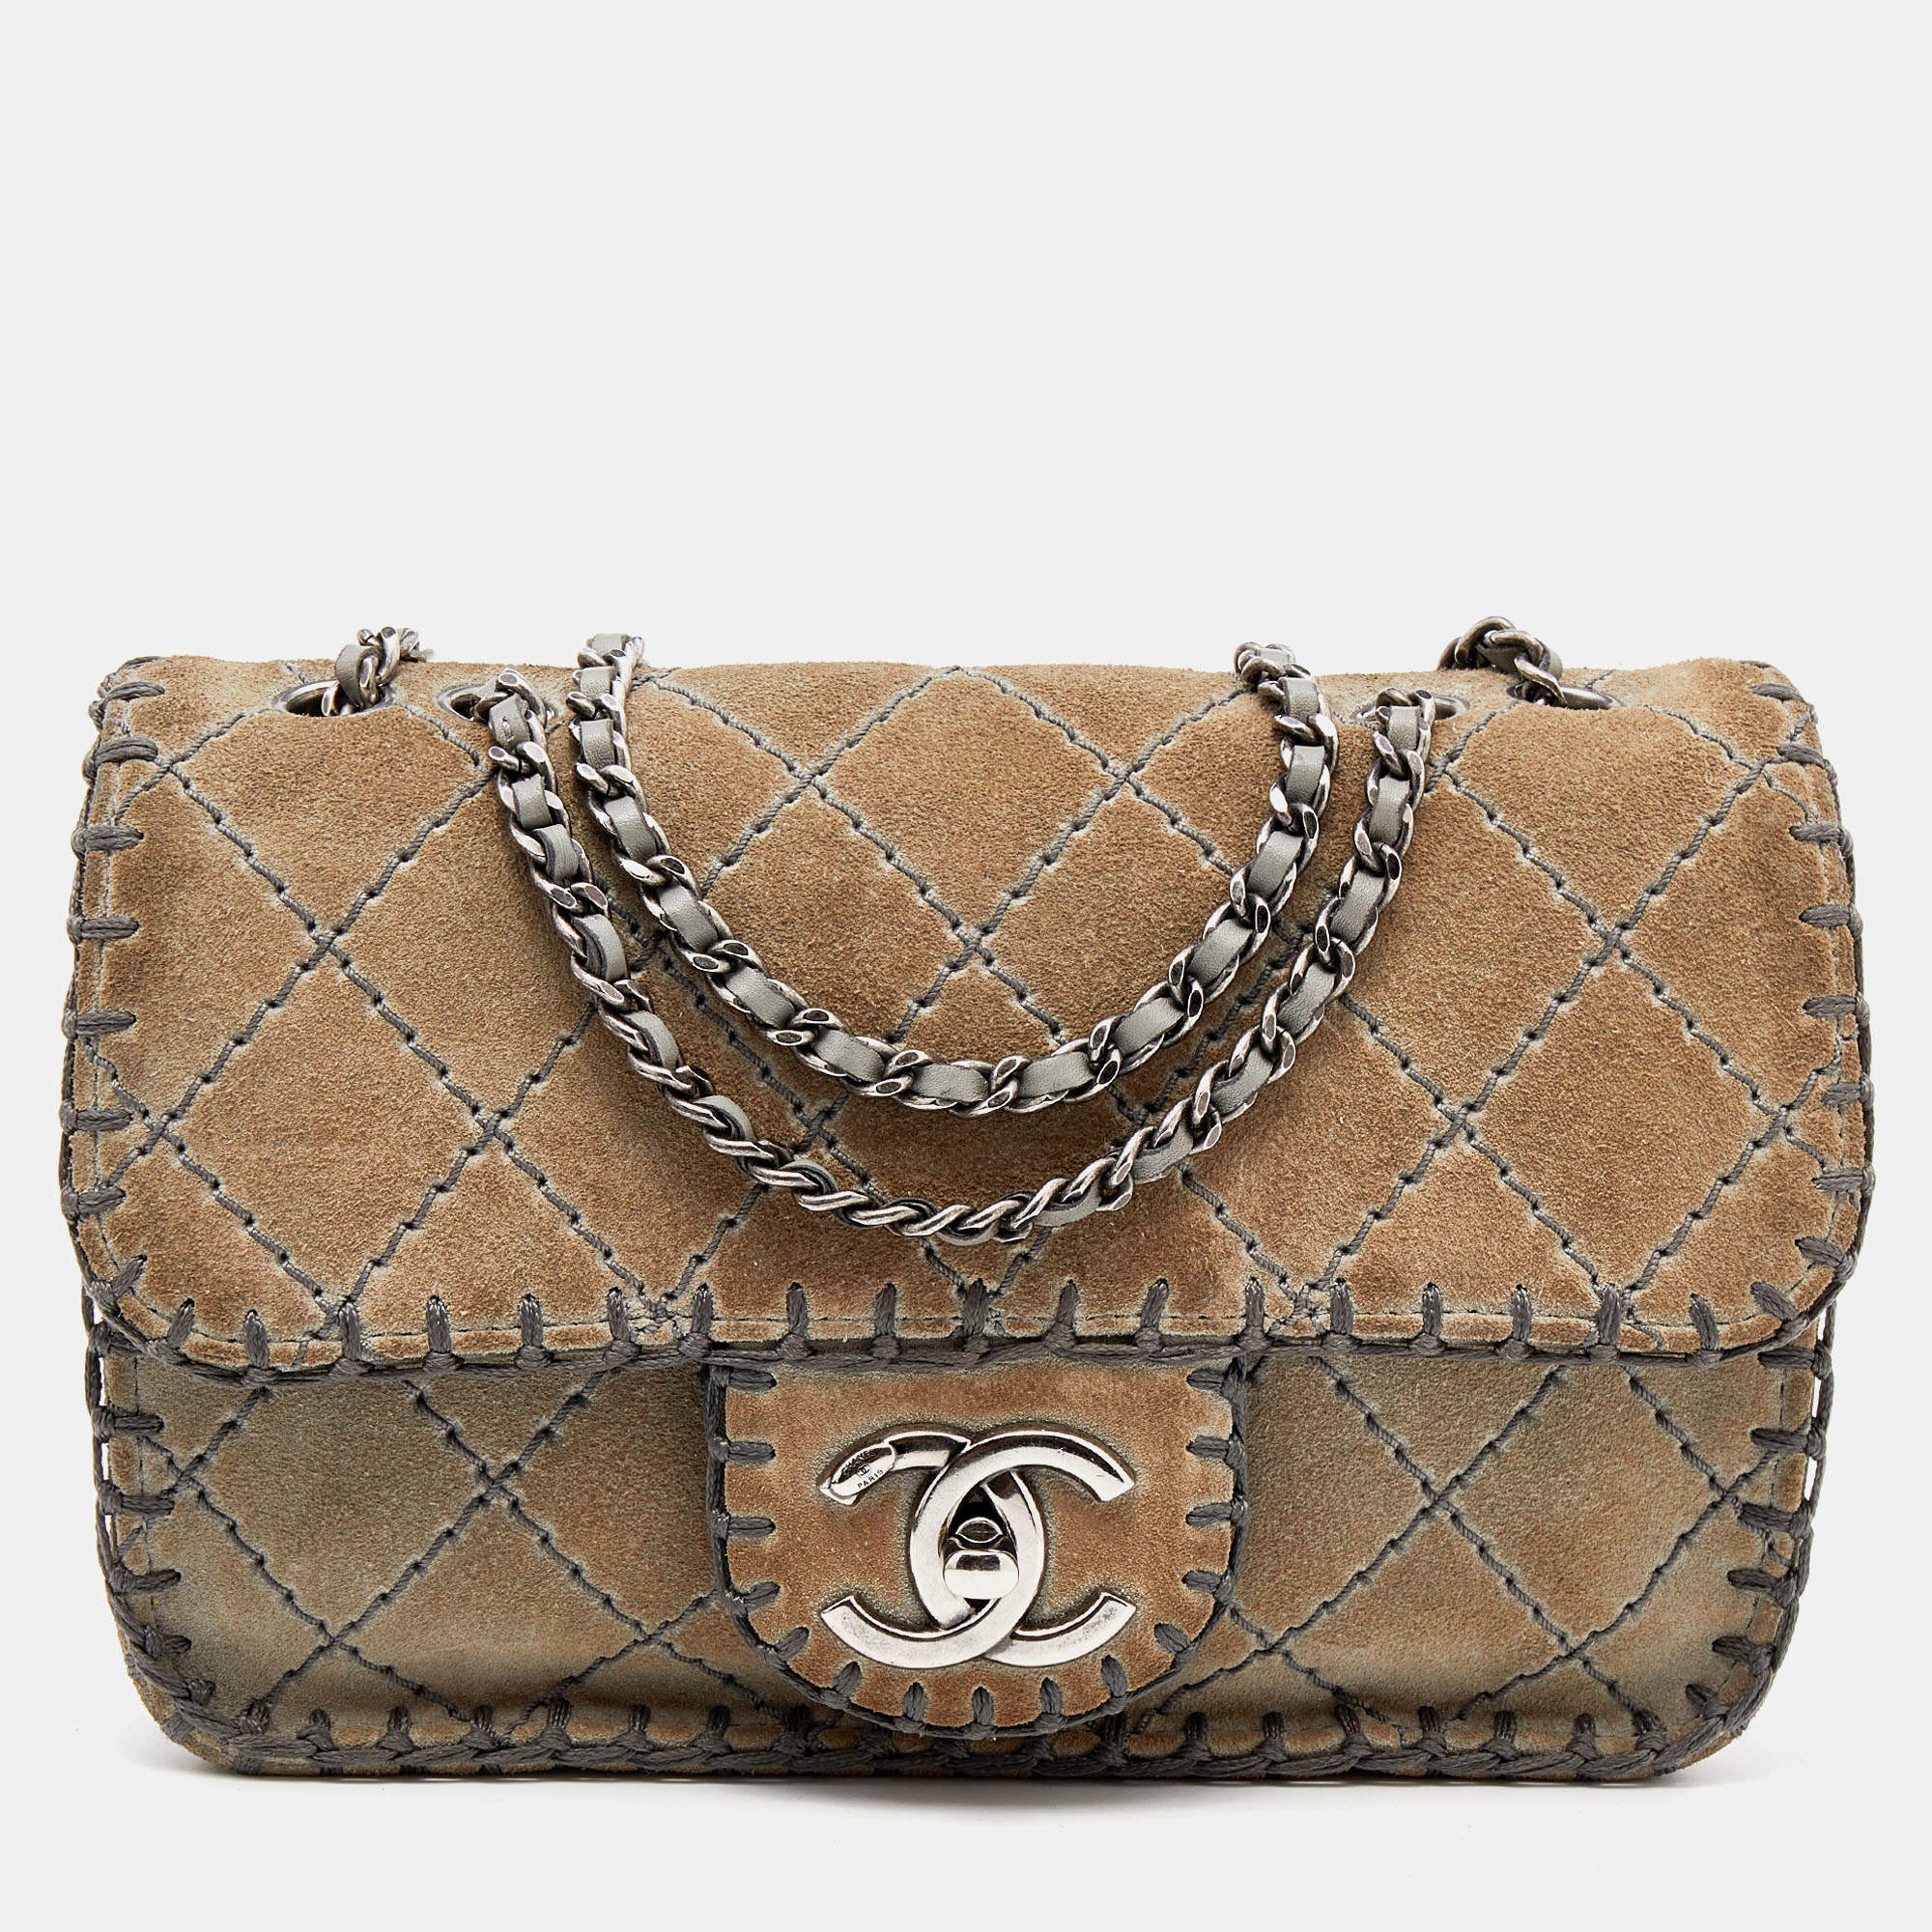 Chanel Grey Quilted Suede Whipstitch Small Flap Bag